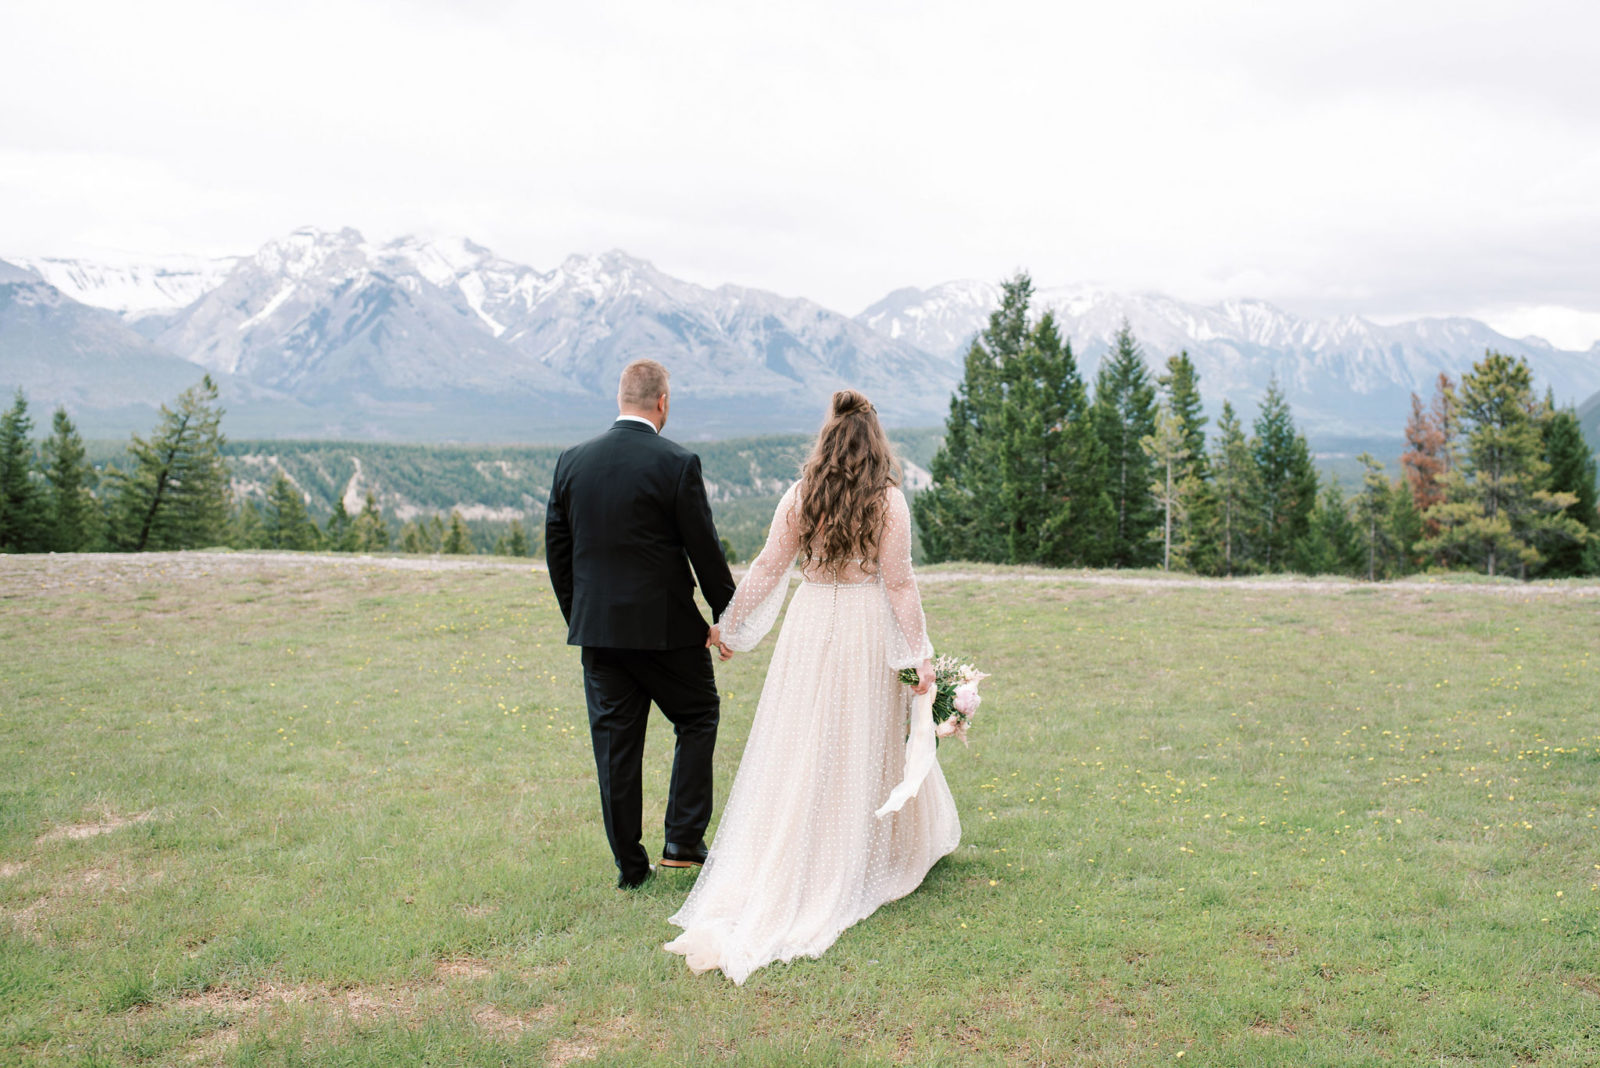 Newly eloped couple in romantic attire walk along the grass at Tunnel Mountain with the Banff National Park mountains in the background